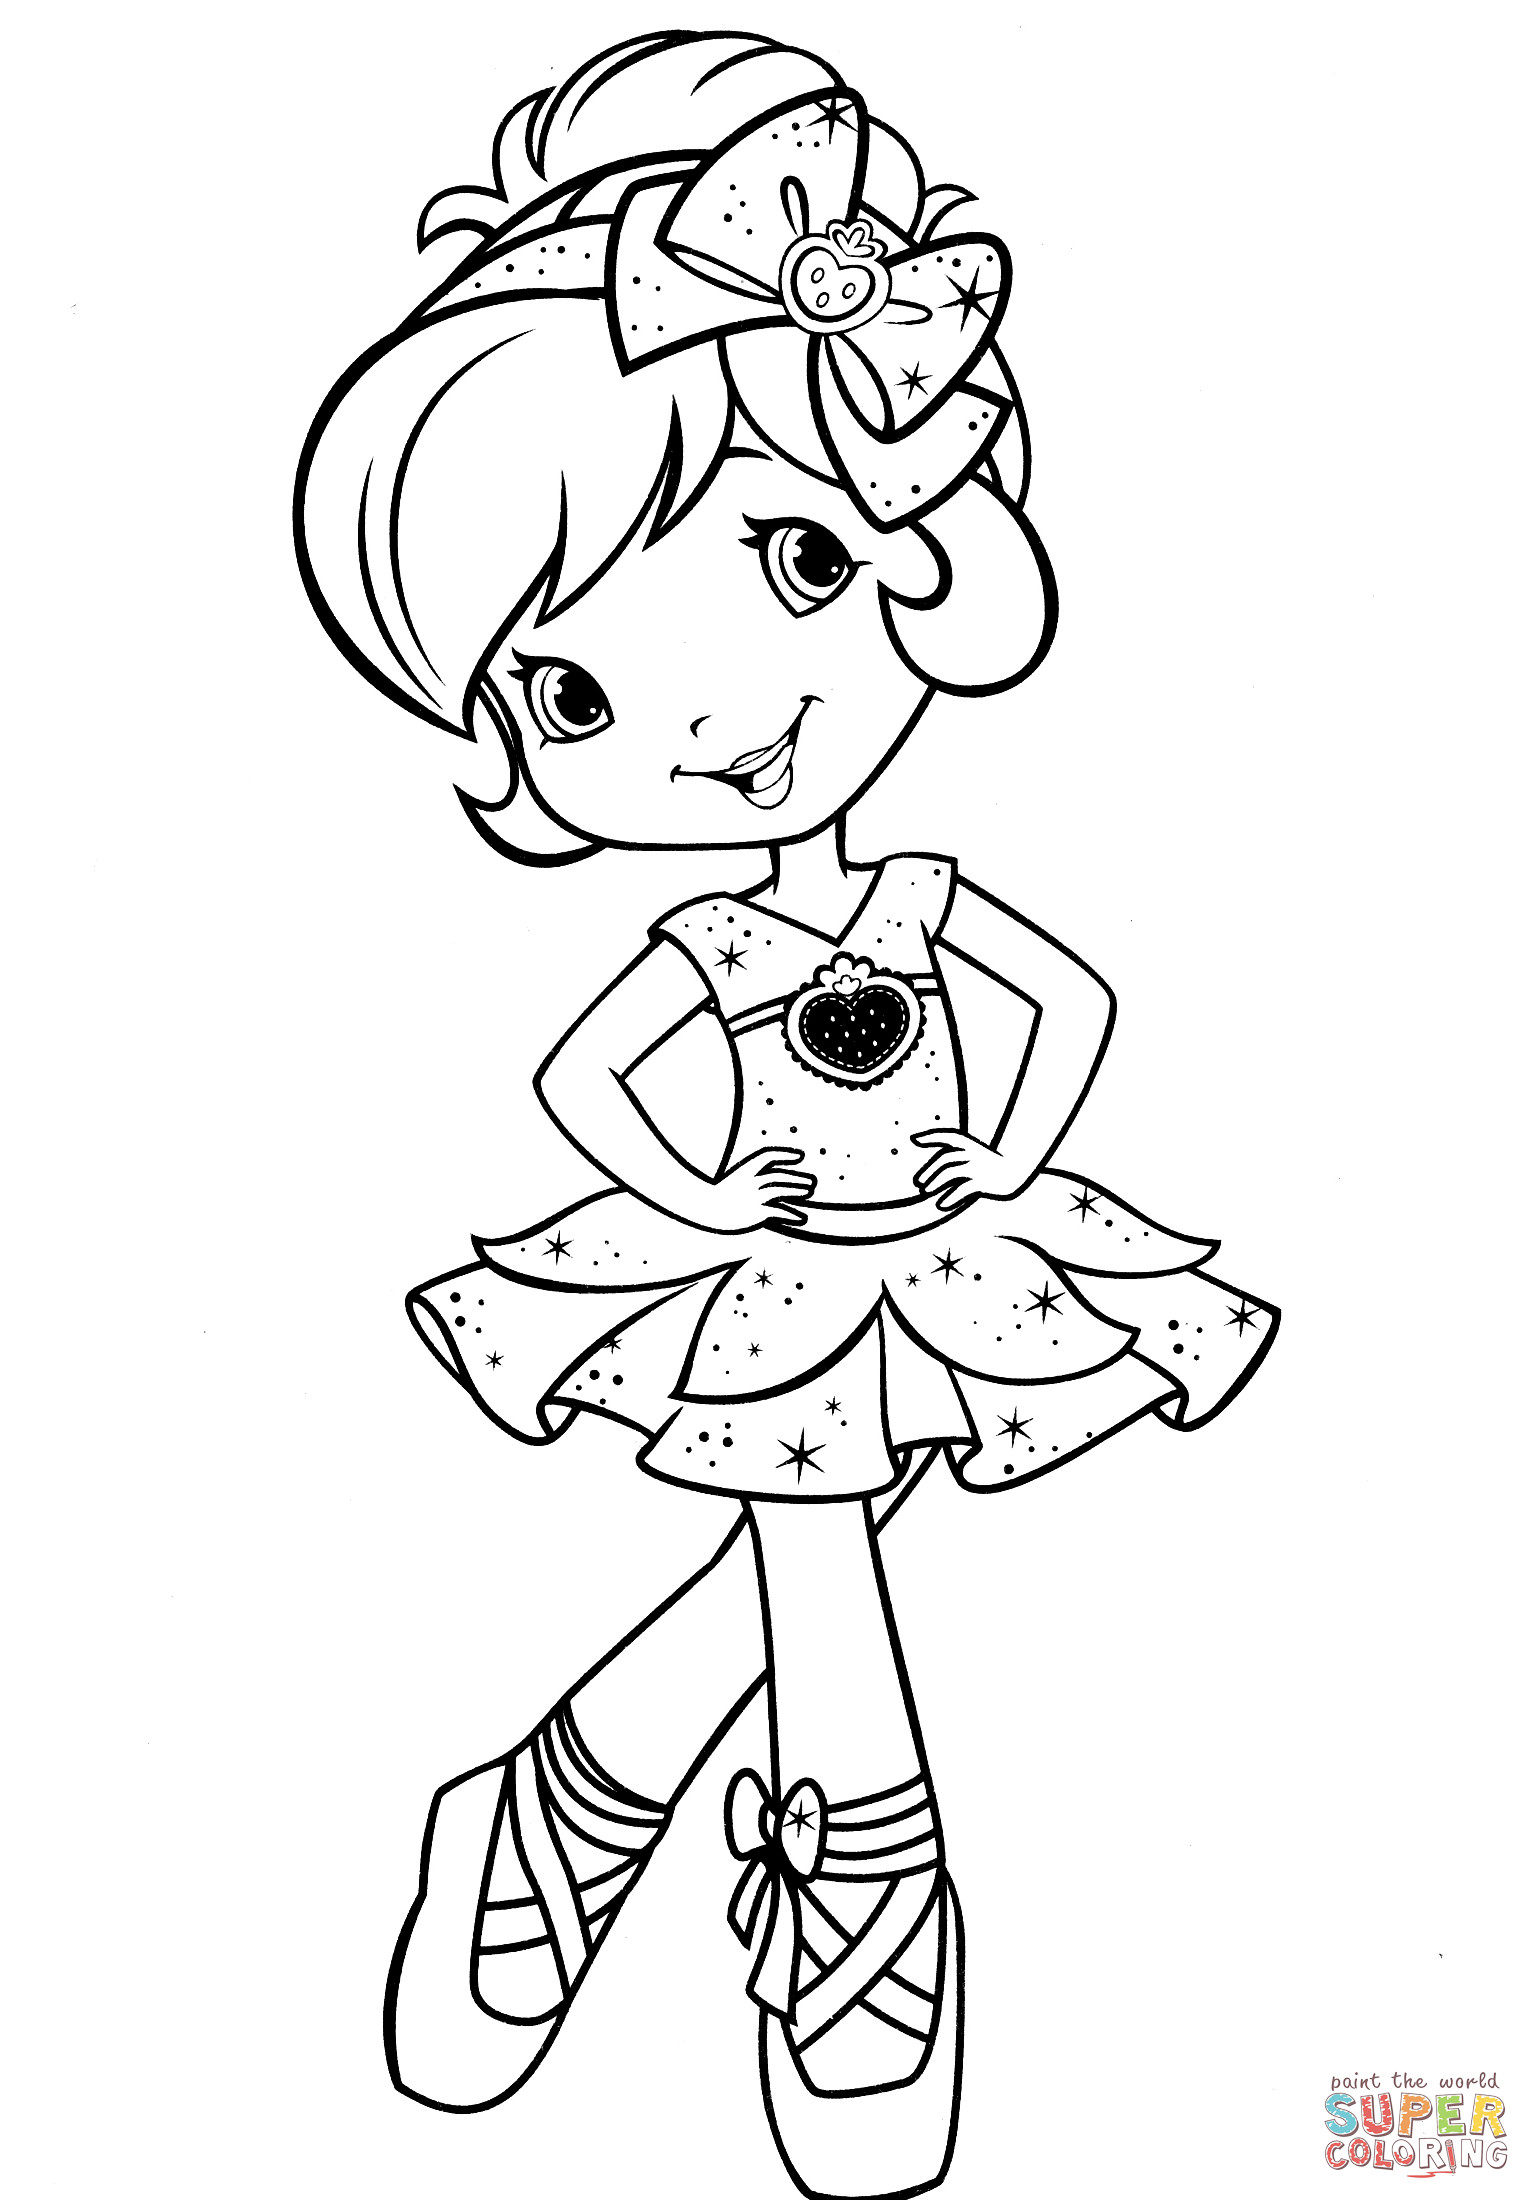 Ballerina Printable Coloring Pages
 Strawberry Shortcake Ballerina coloring page